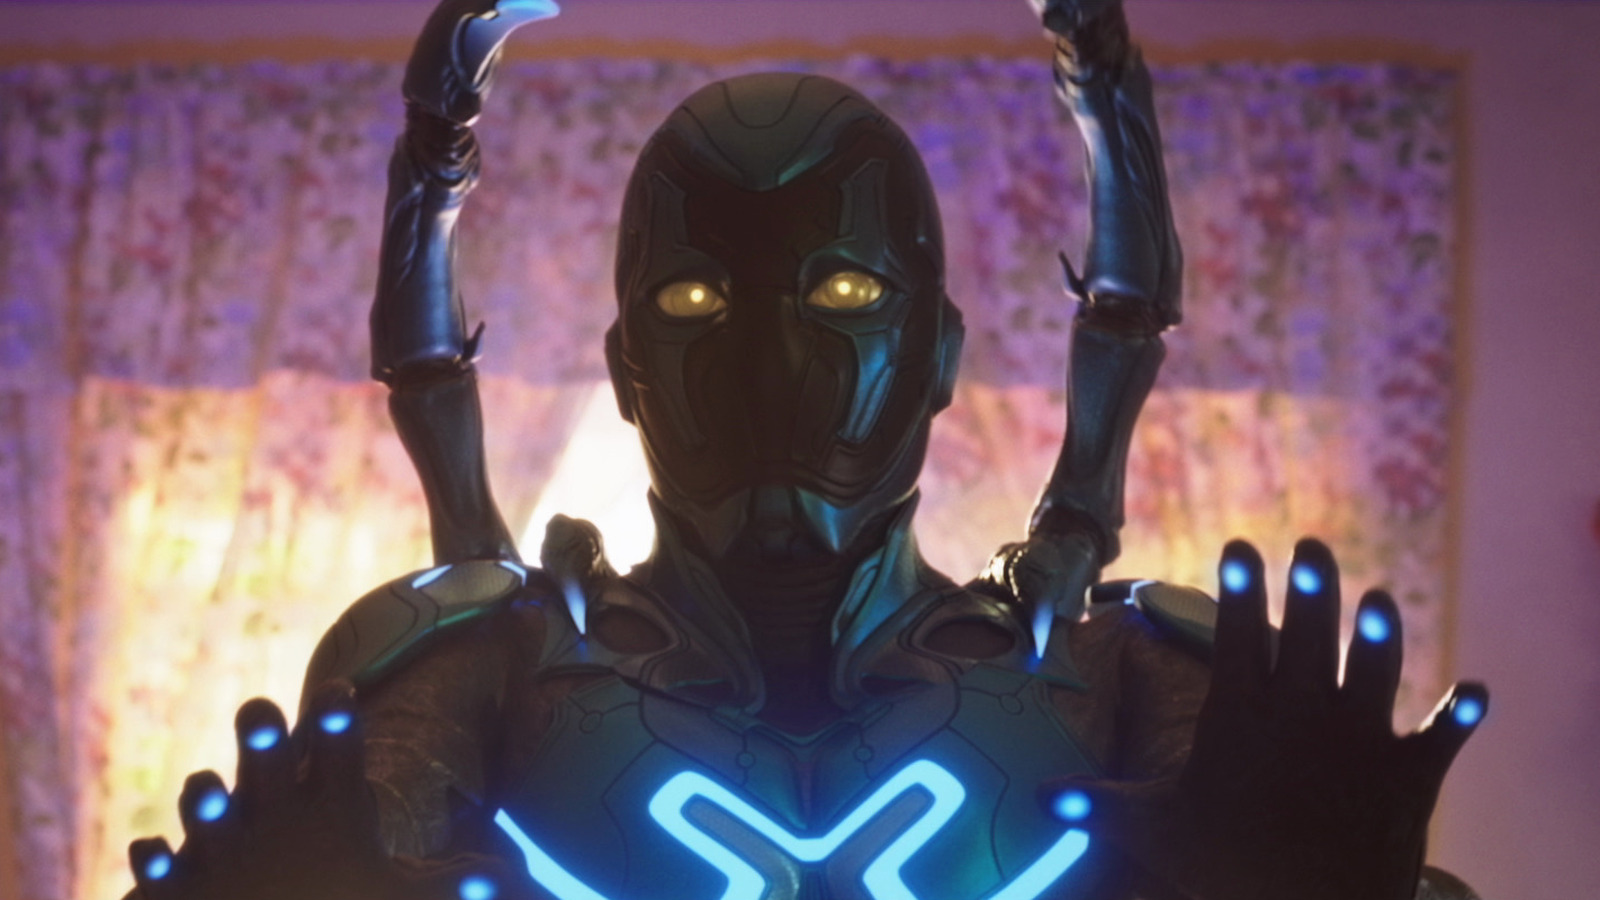 Even If It's Really Good, DC's Blue Beetle Faces An Uphill Box Office